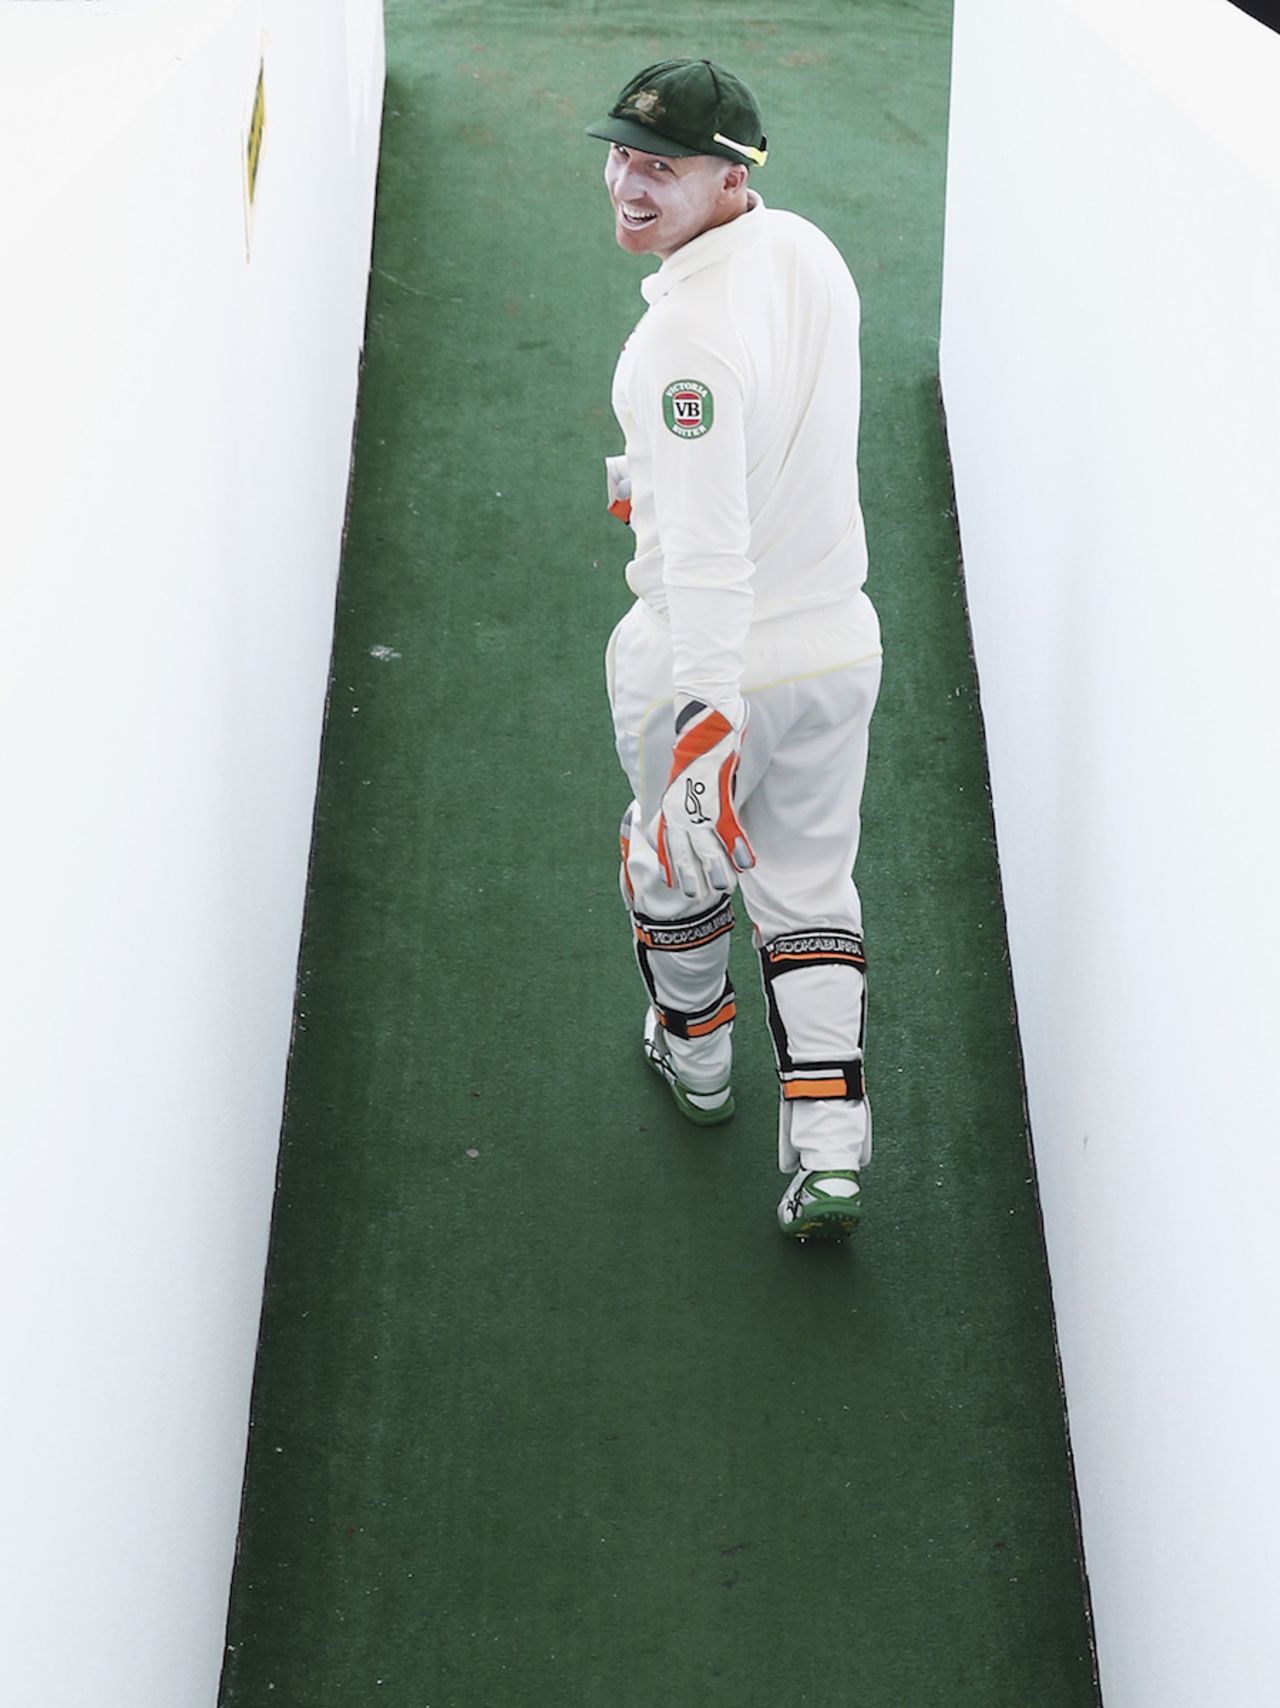 Brad Haddin walks out on the second morning of the Test, Pakistan v Australia, 2nd Test, Abu Dhabi, 2nd day, October 31, 2014